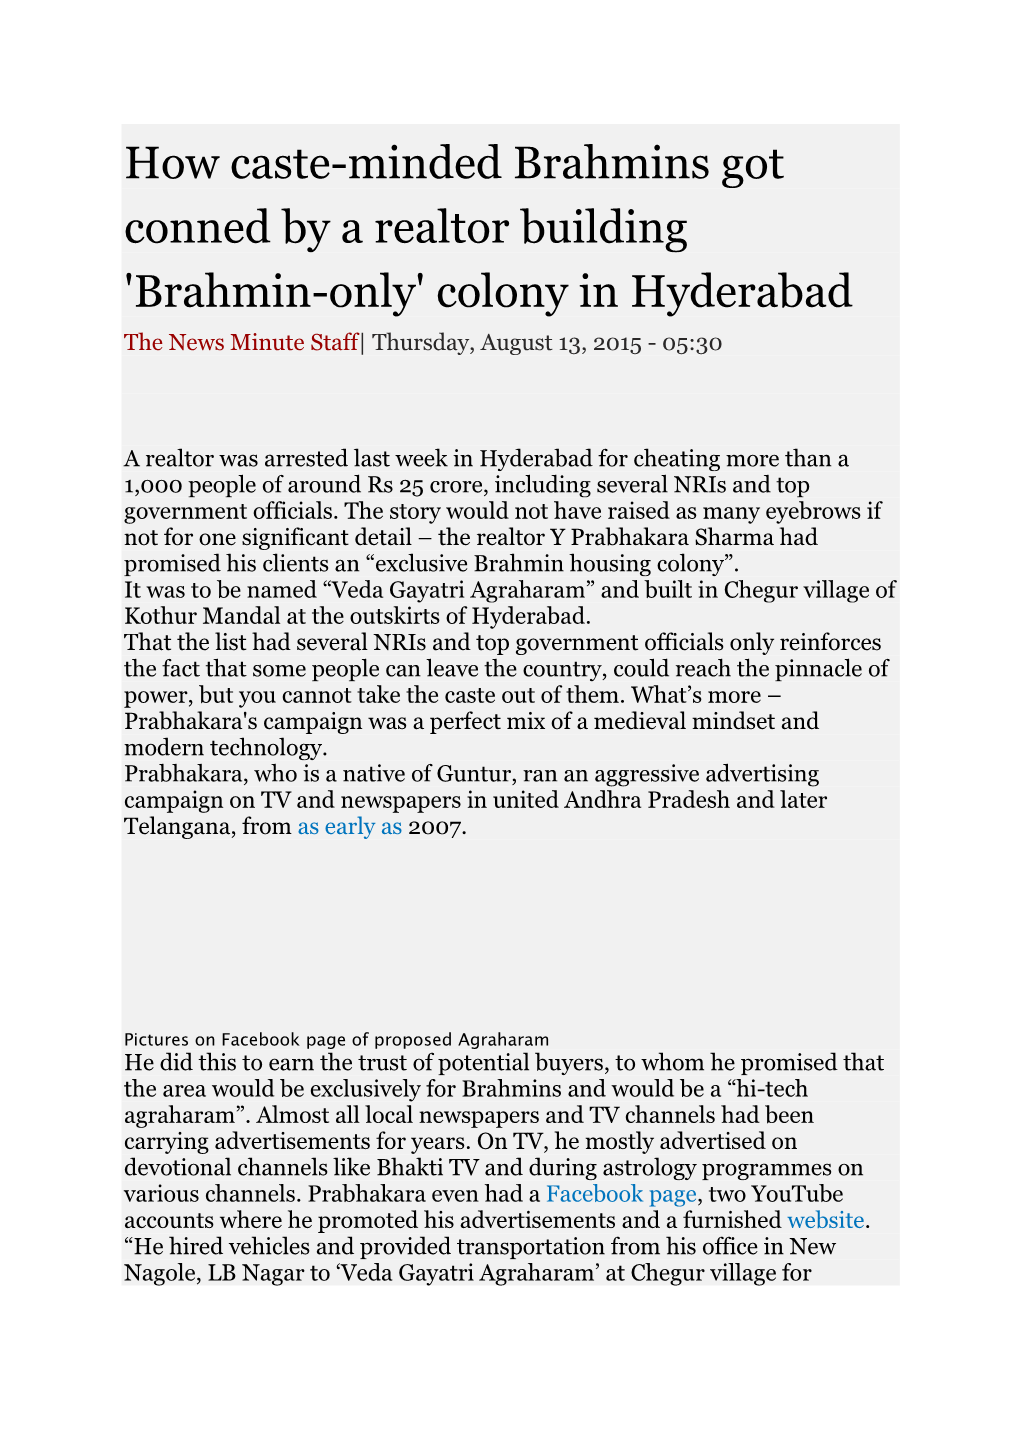 'Brahmin-Only' Colony in Hyderabad the News Minute Staff| Thursday, August 13, 2015 - 05:30